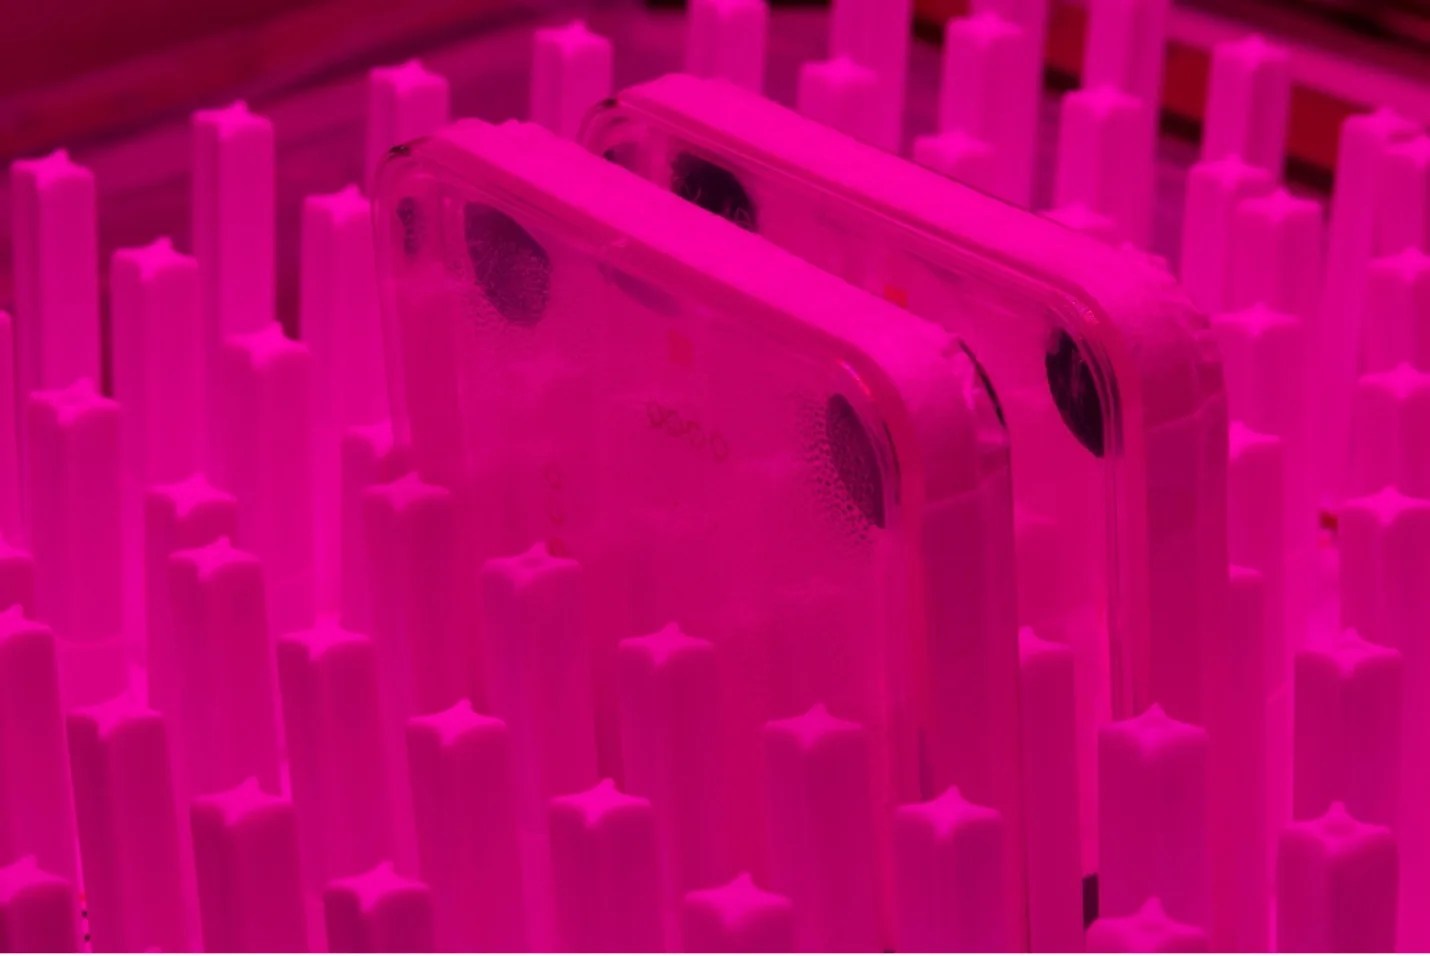 Lit in fuchsia light, an array of white plastic tubes in the shape of four-point stars stand in rows next to each other. Slid between these tubes are two square dishes. These dishes are transparent on one side and white on the other. Through the transparent side are two black circles, one on each of the top corners.